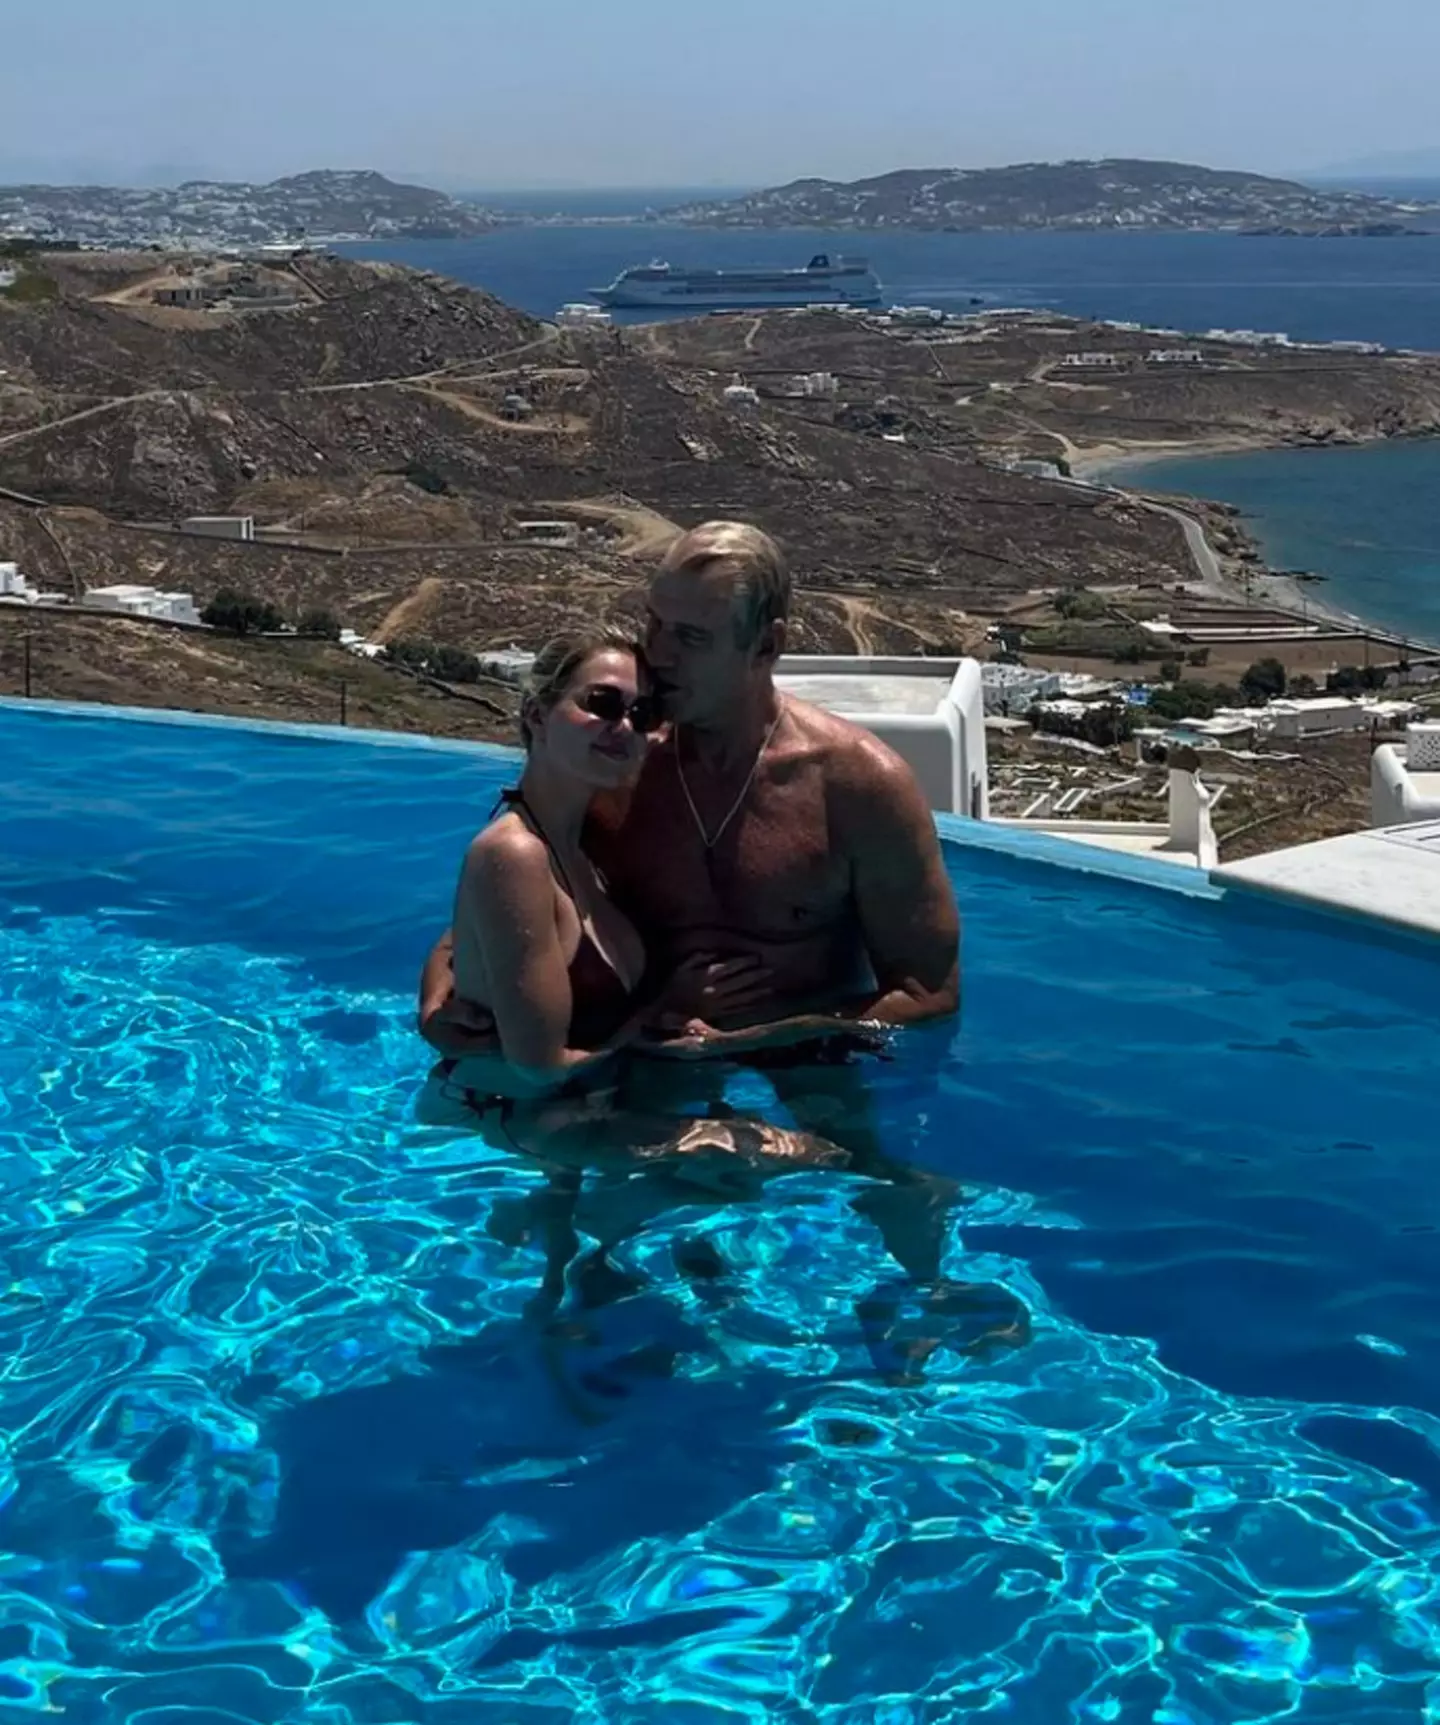 Dolph Lundgren and his girlfriend tied the knot in Mykonos.